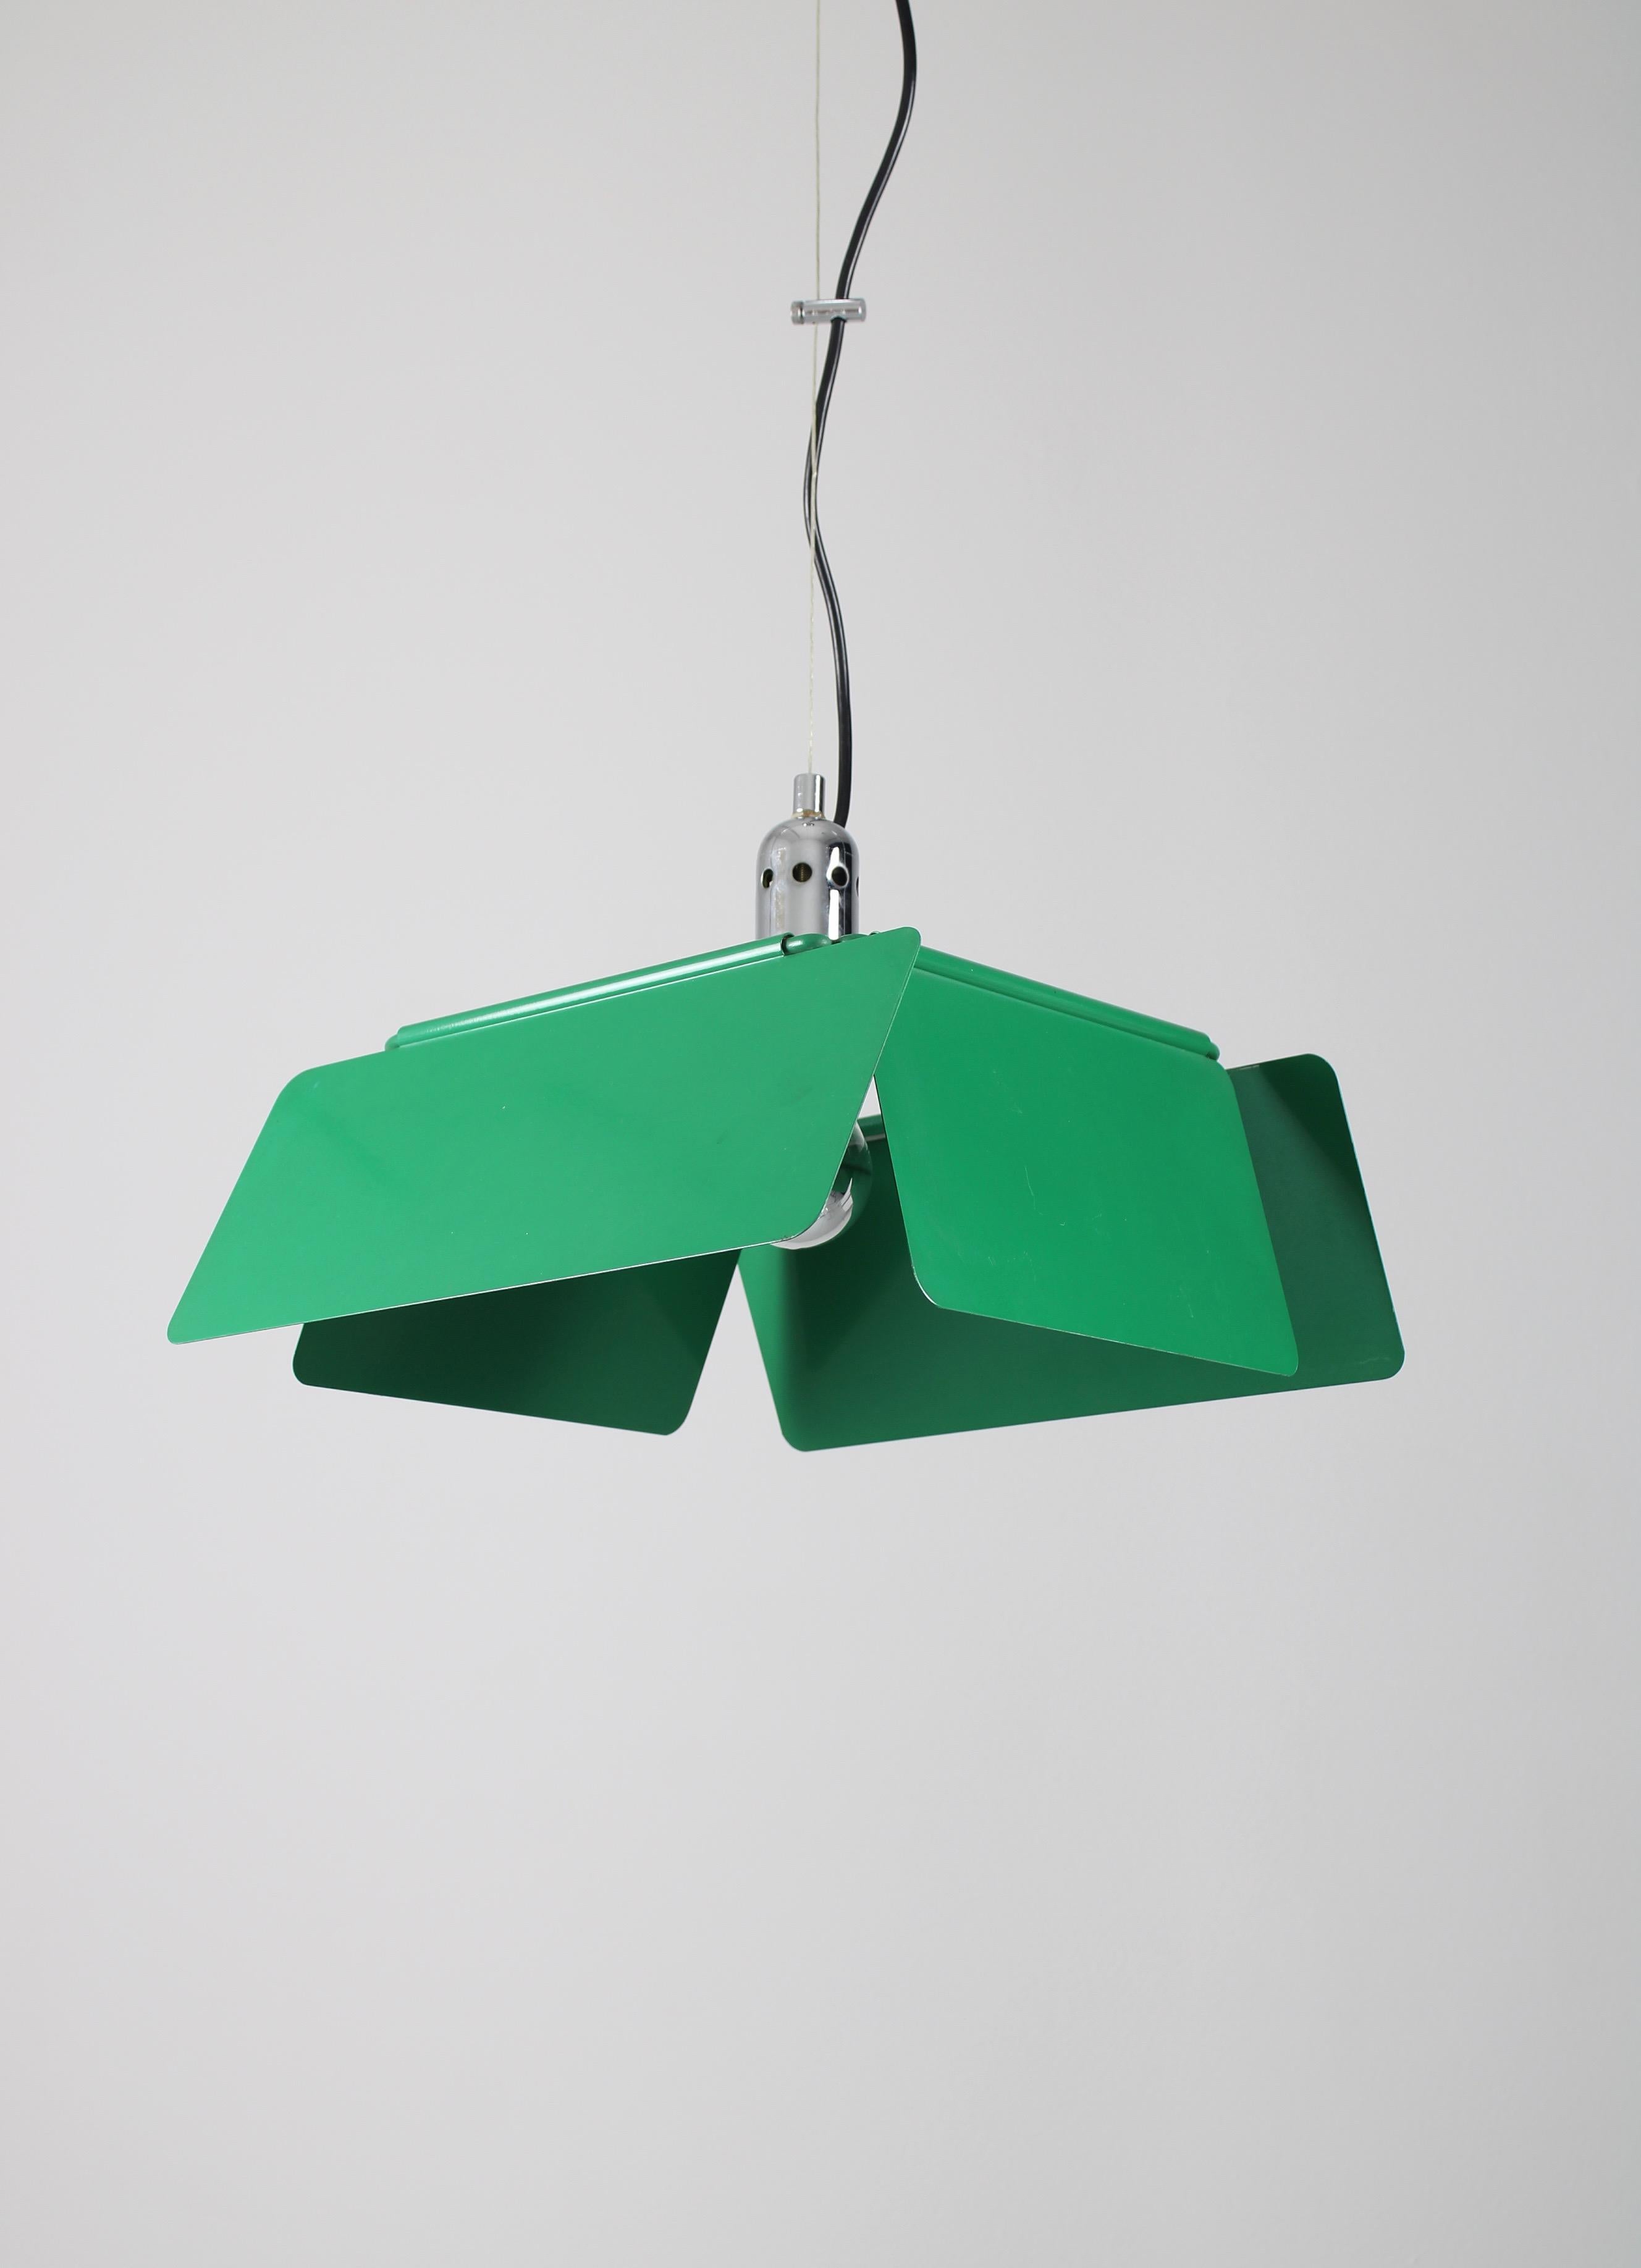 Very rare pedant lamp called the Diaframma. Designed by Fabio Lenci in 1974. Produced by Design House which was a part of the iGuzzini brand. This interesting design features a square shaped metal structure with on each side an adjustable shade. By